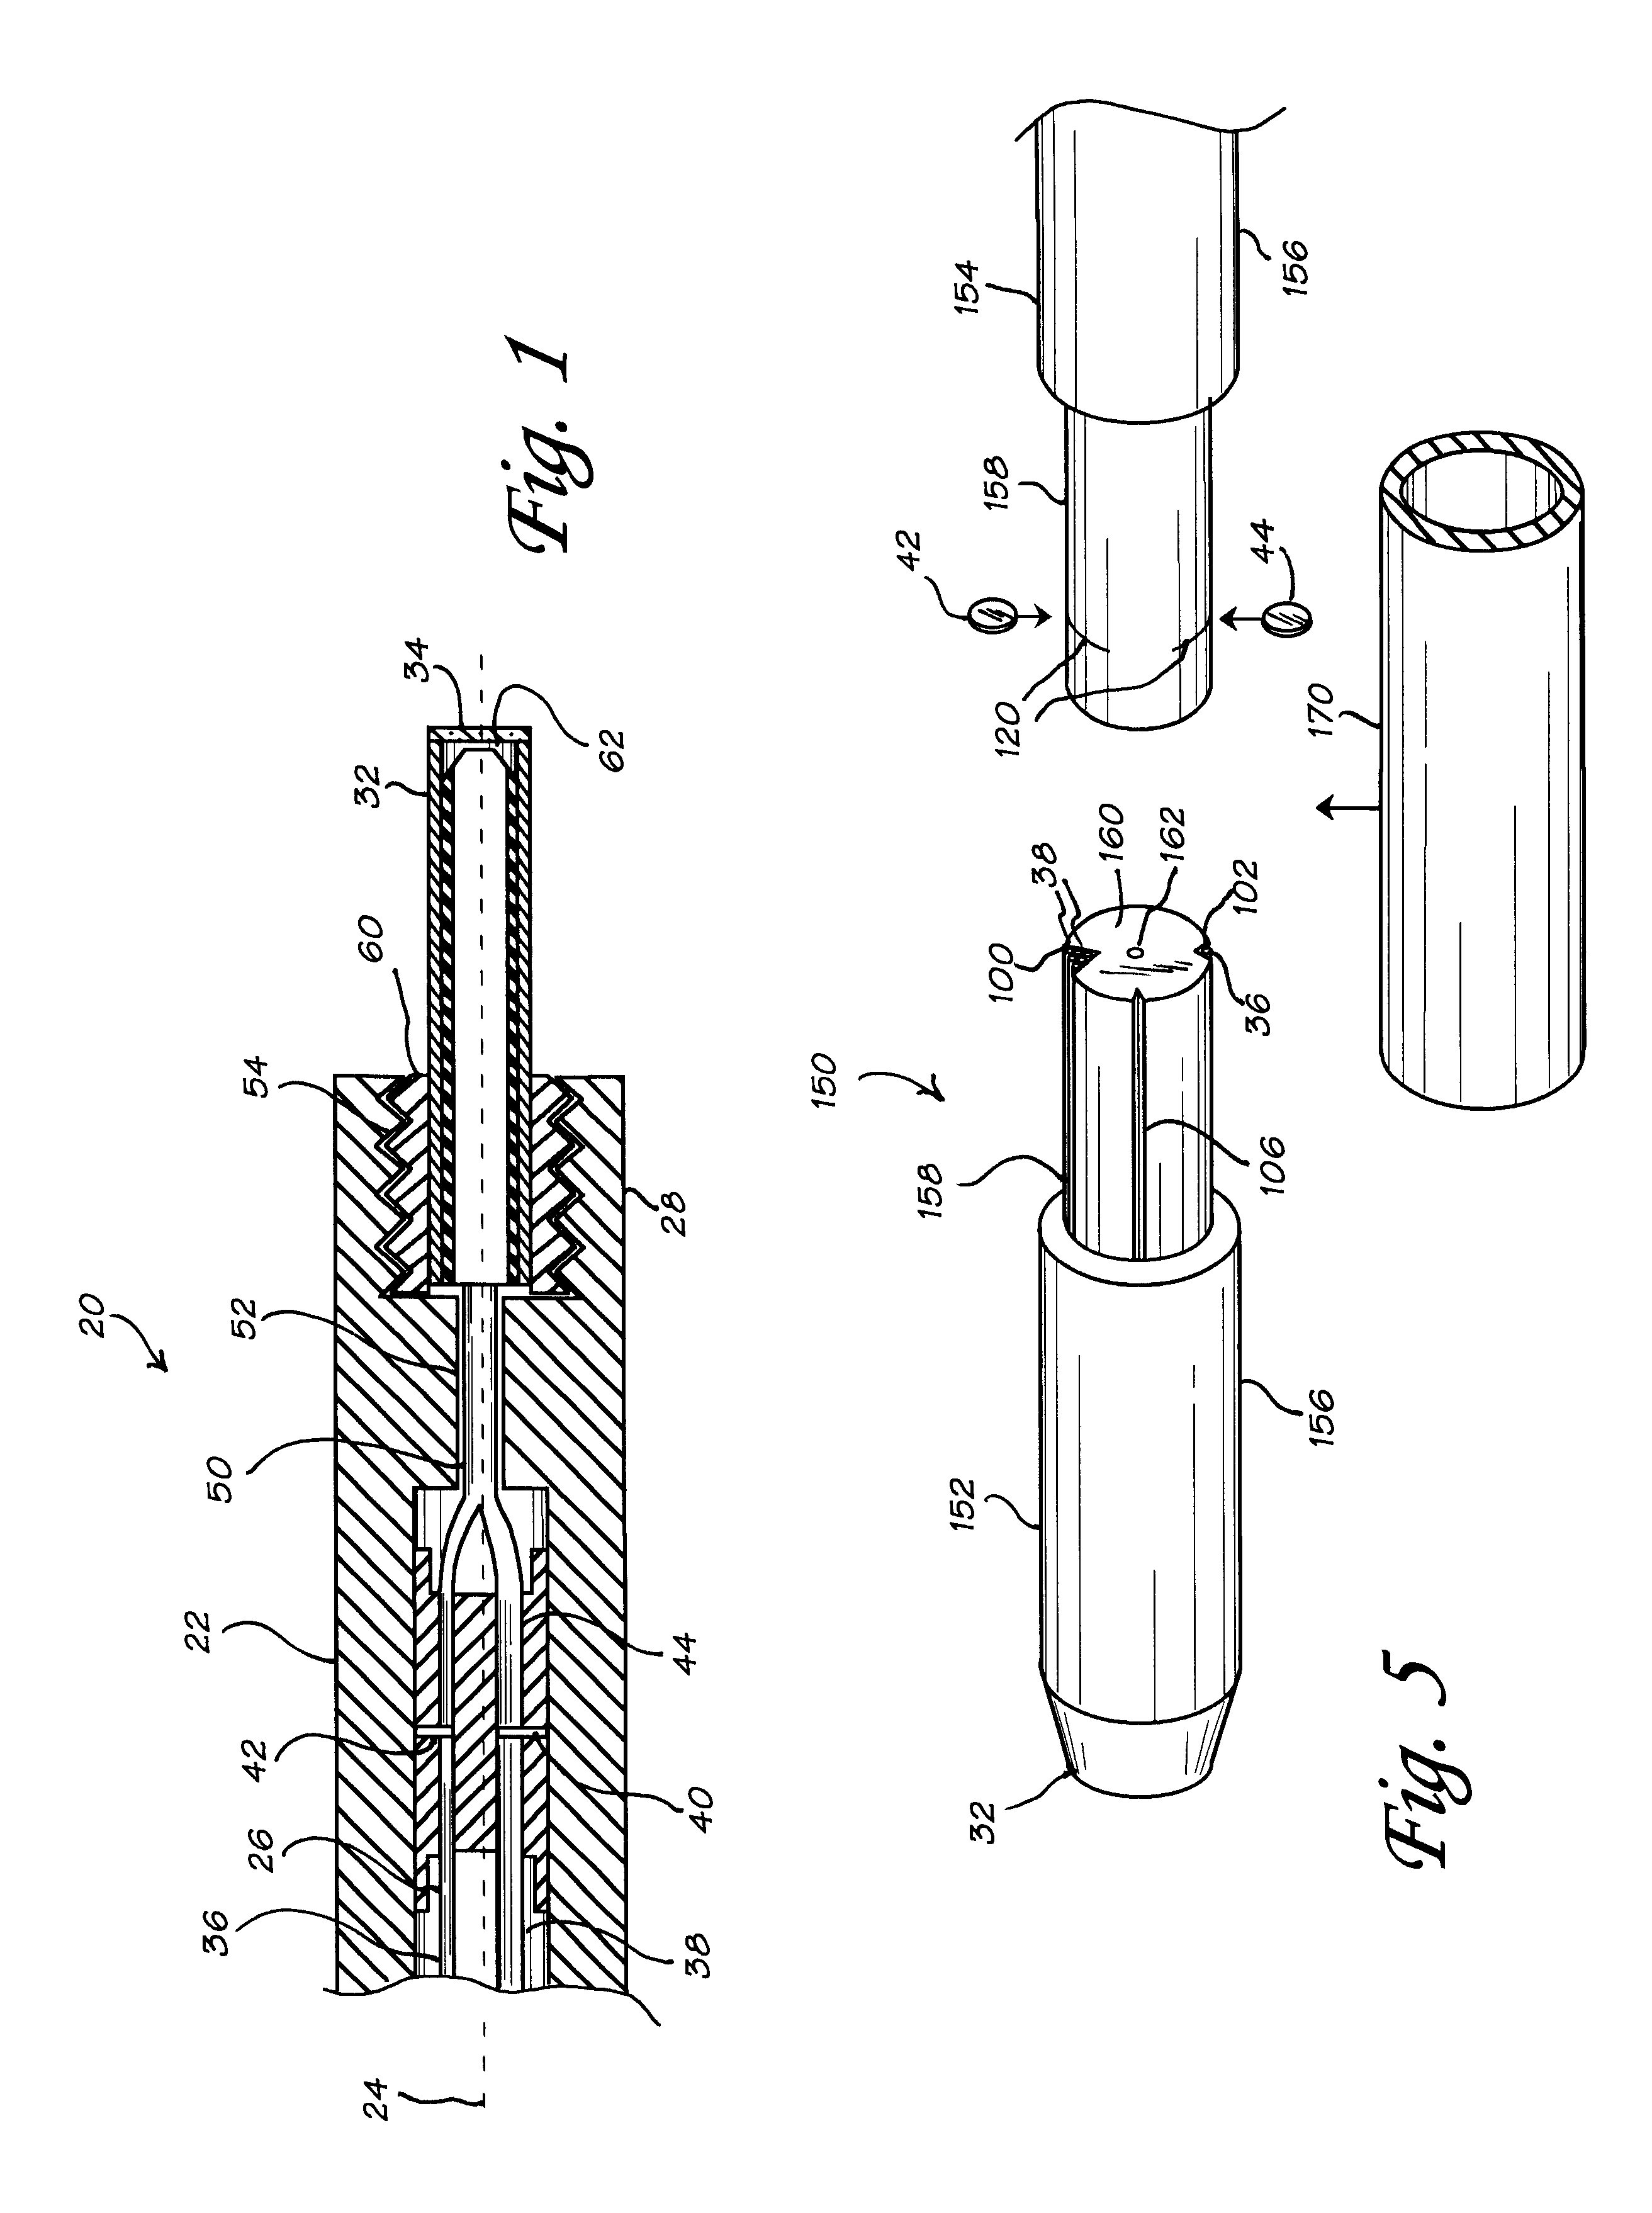 Fiber optic probe and coupler assembly